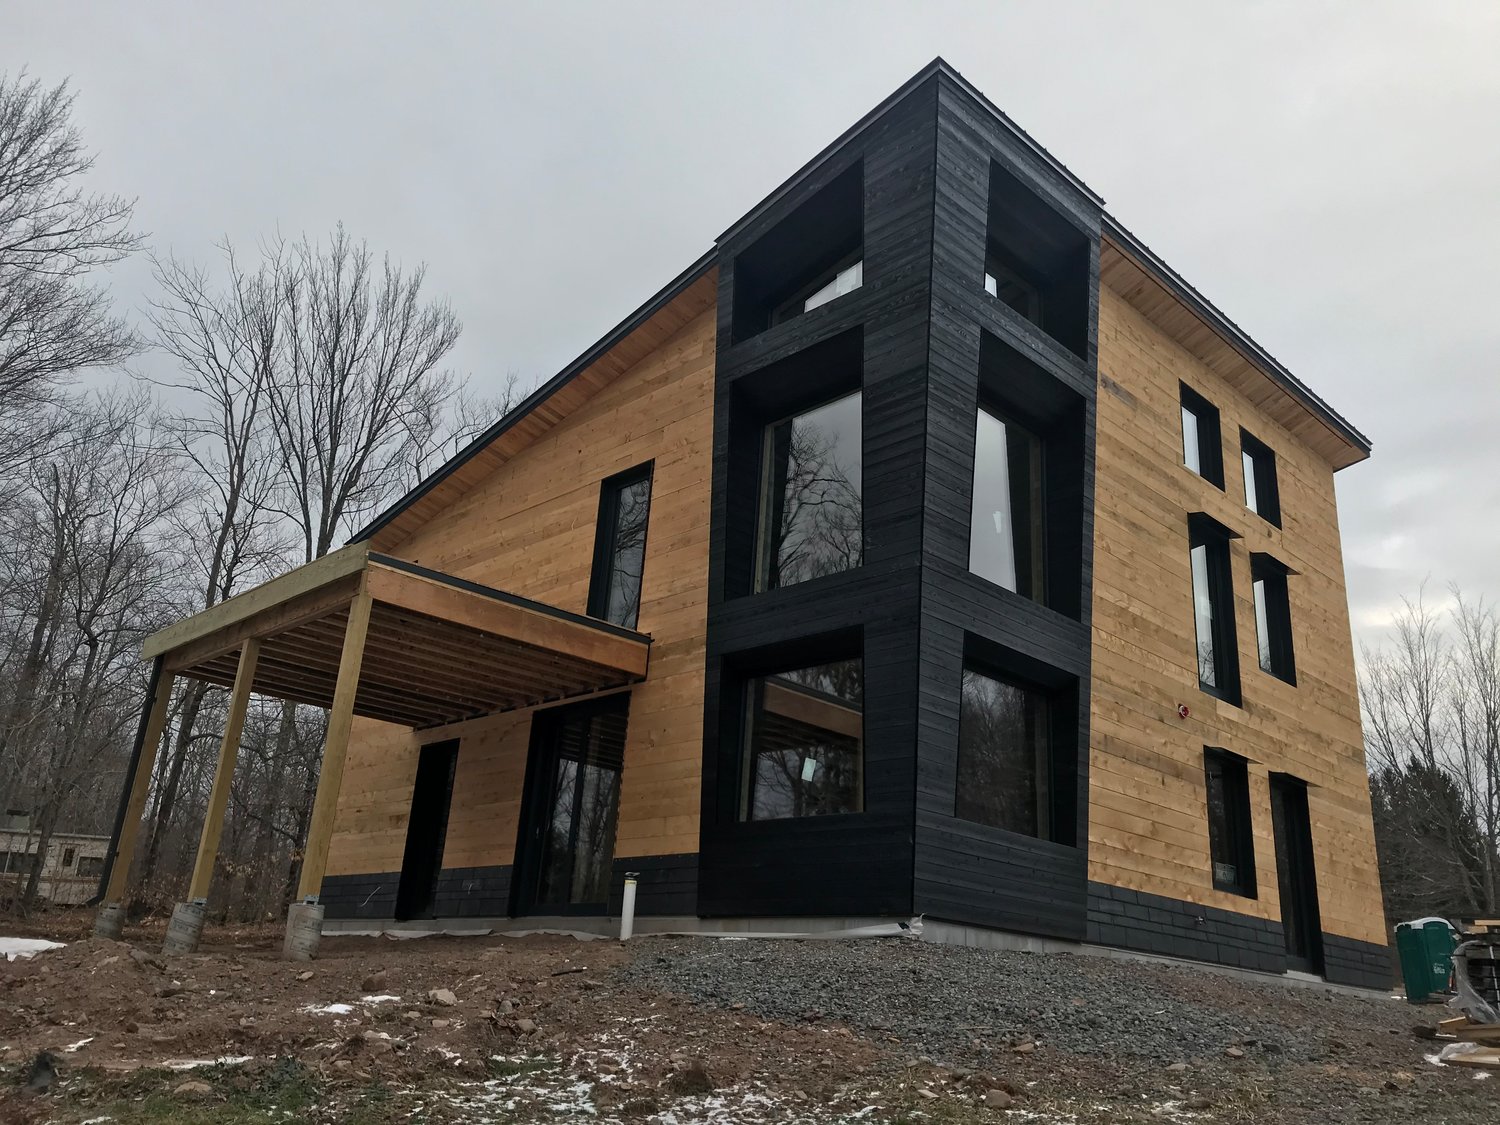 The first house's shell was prefabricated in New Hampshire, shipped to New York, where a crew of four people were able to assemble the building over three days.